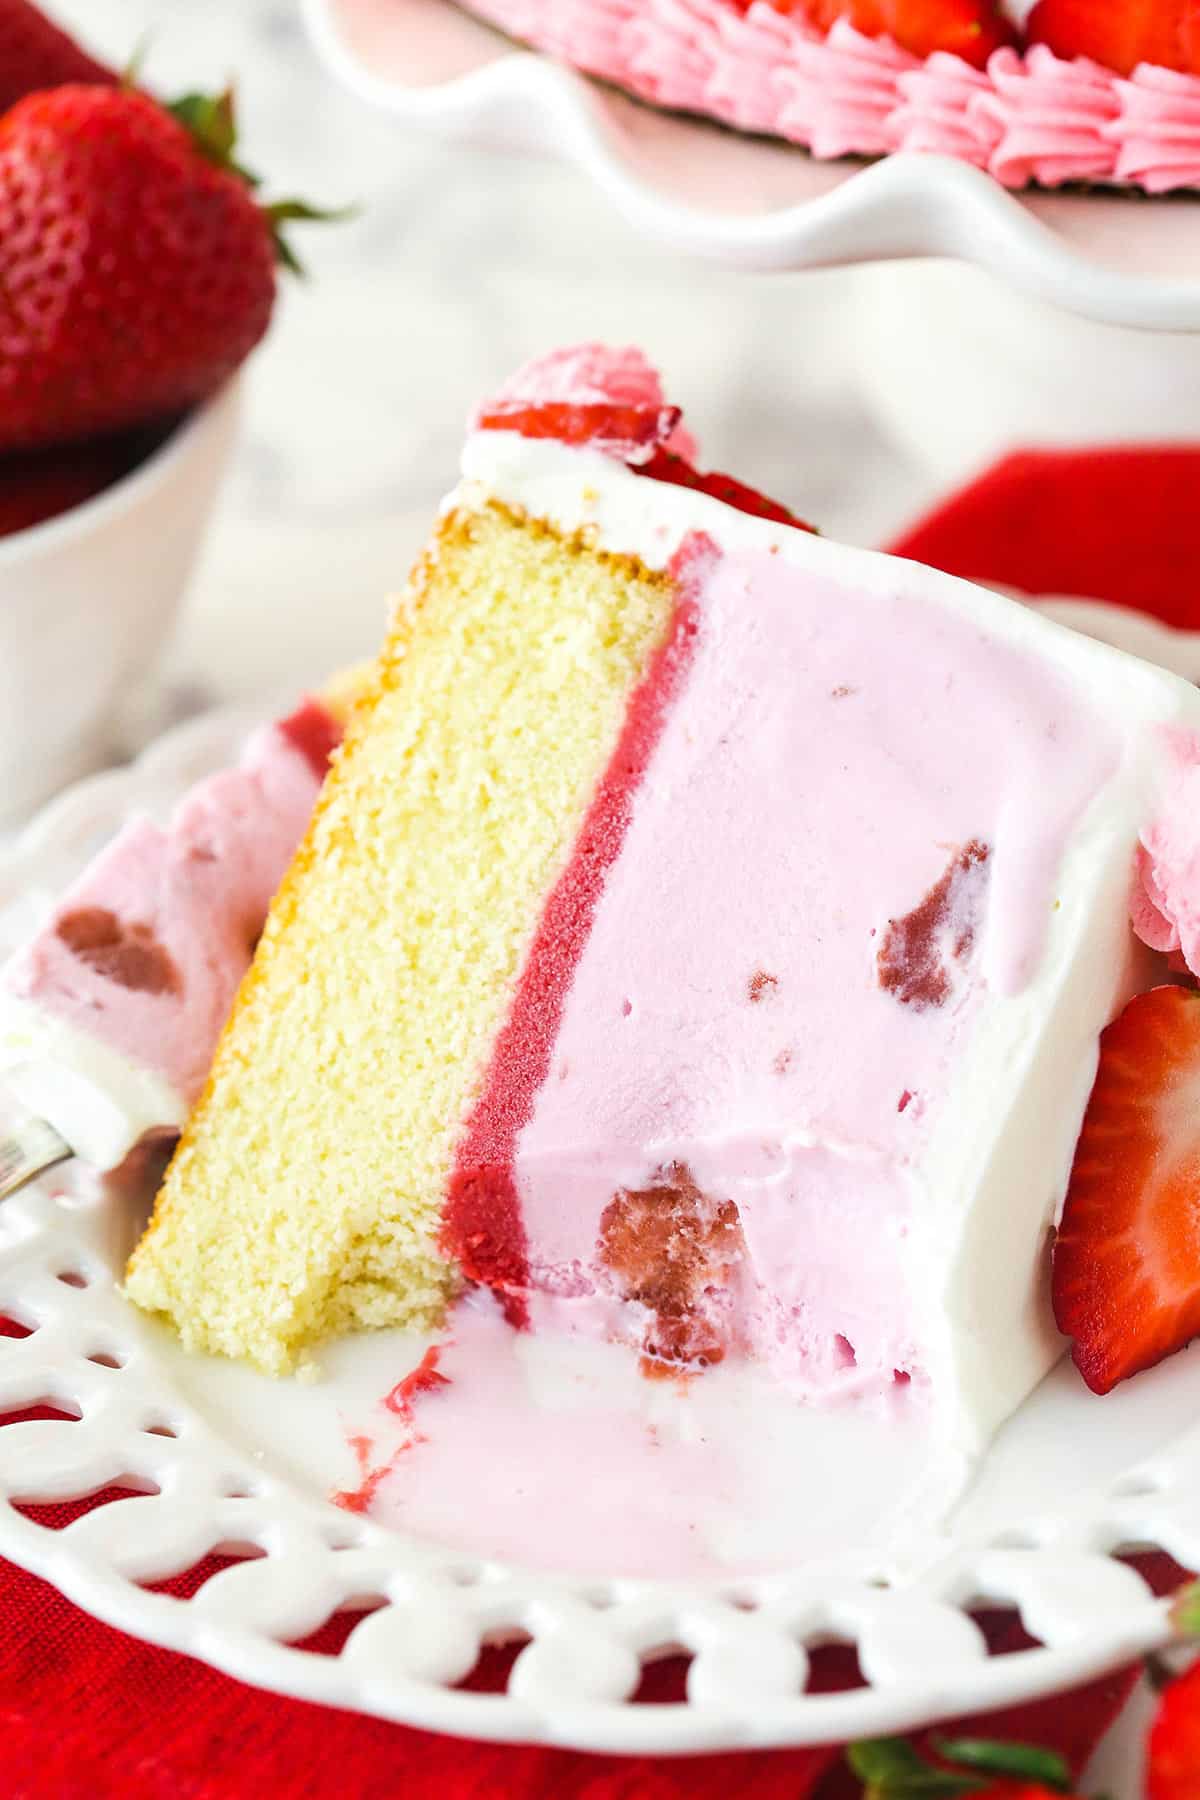 A slice of strawberry ice cream cake on a plate with a bite taken out of it.